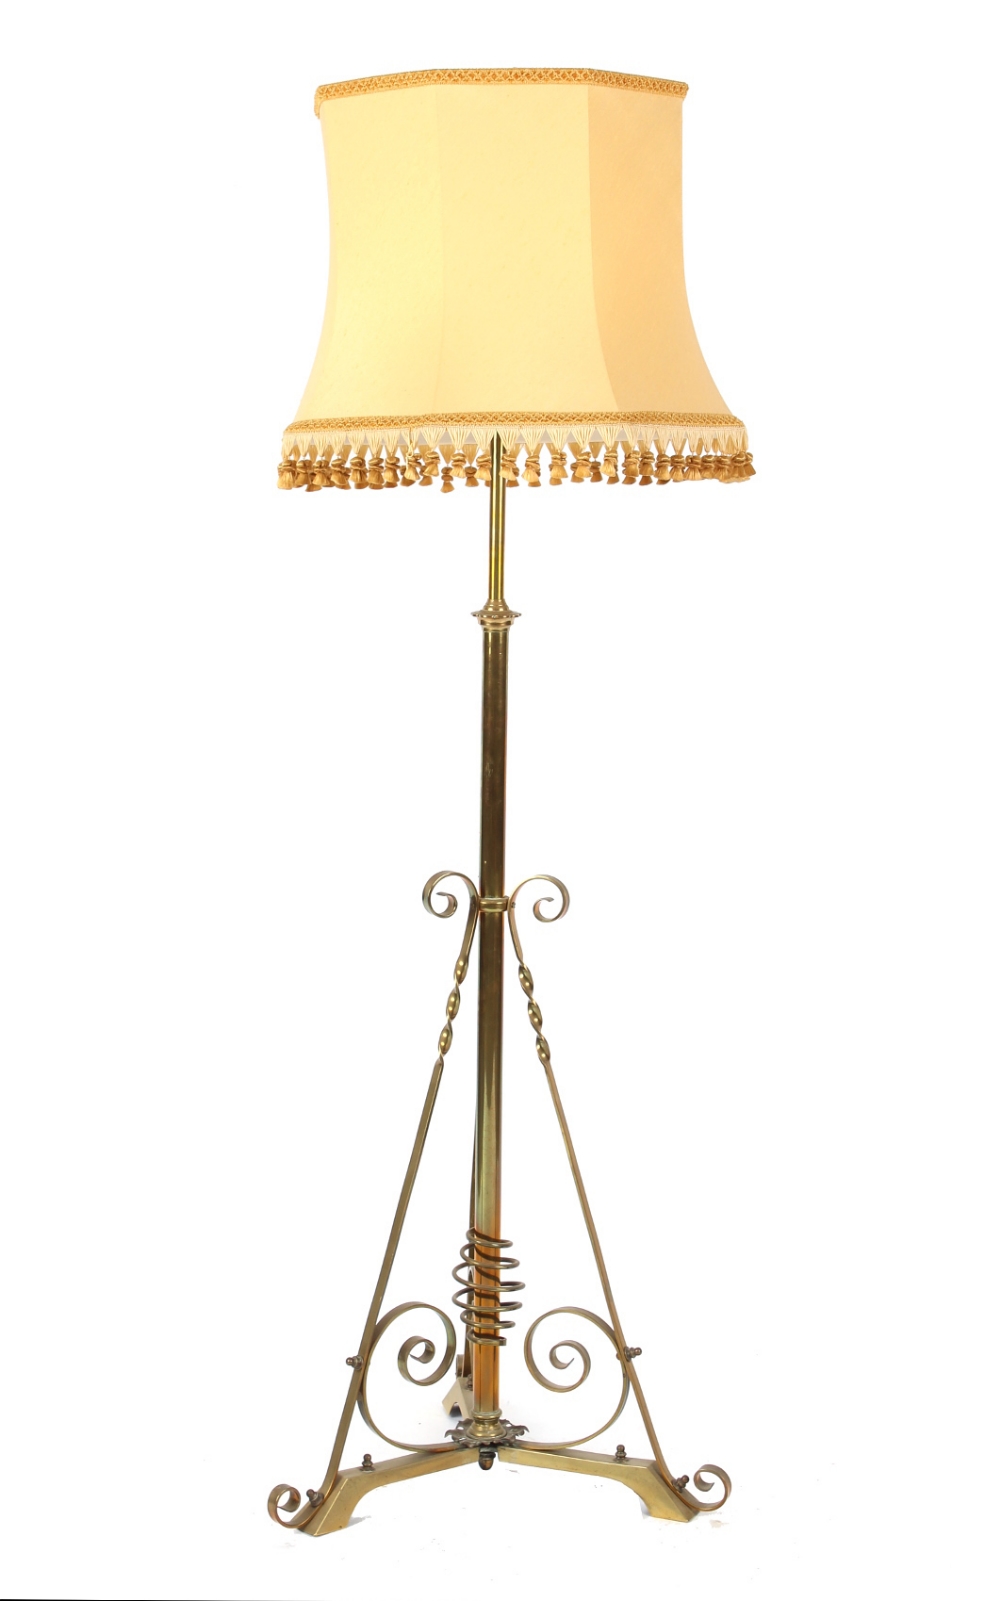 Property of a deceased estate - an early 20th century Art Nouveau brass adjustable lamp standard.